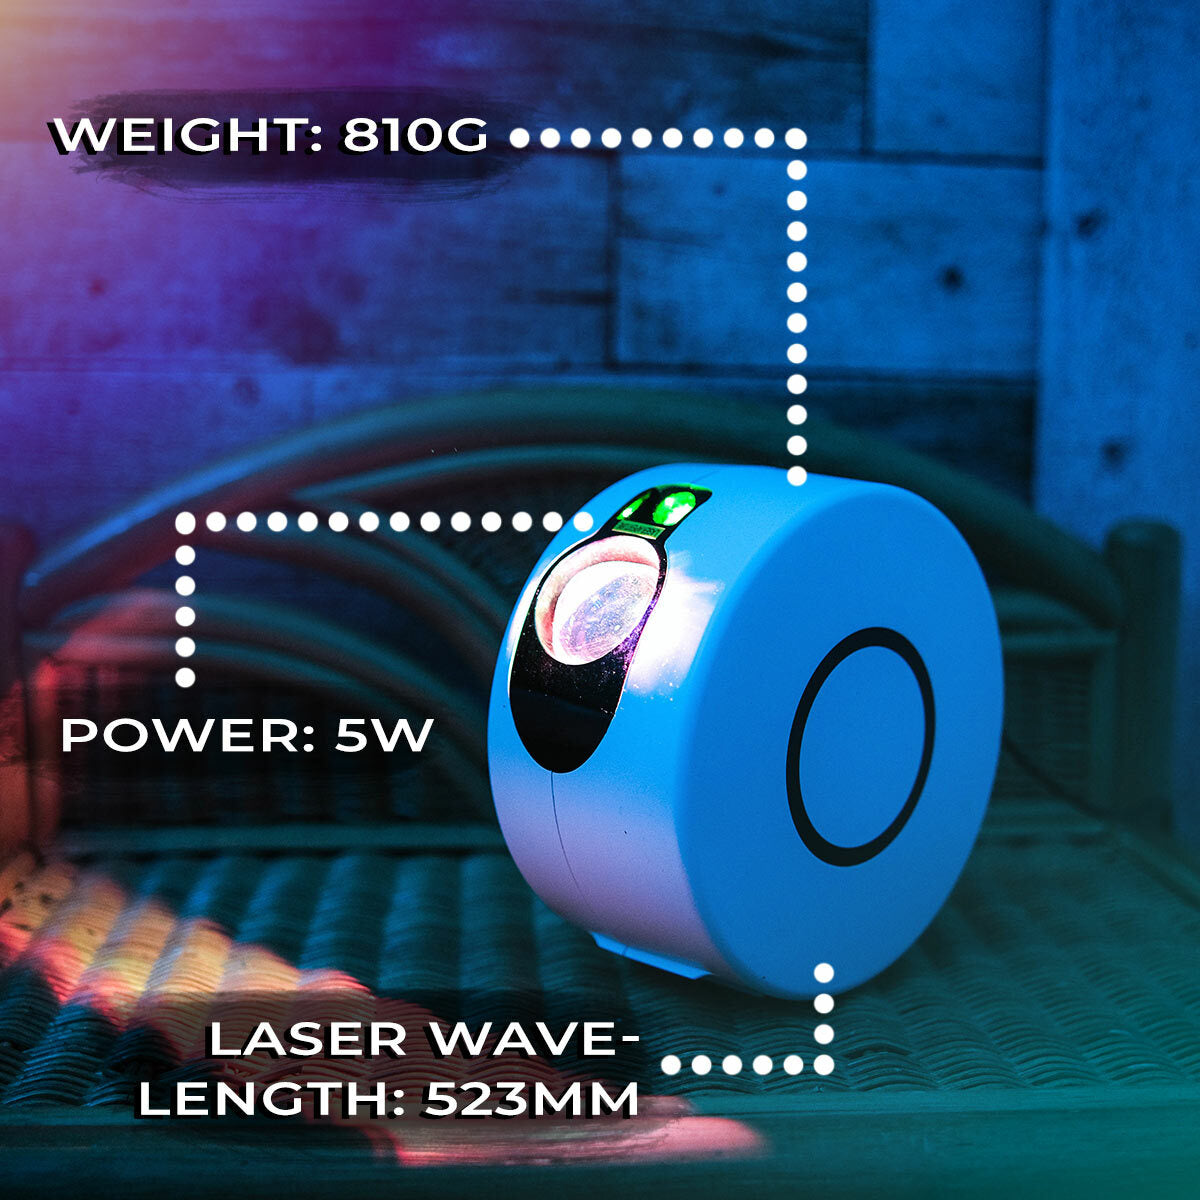 5W Star Projector (US ONLY)